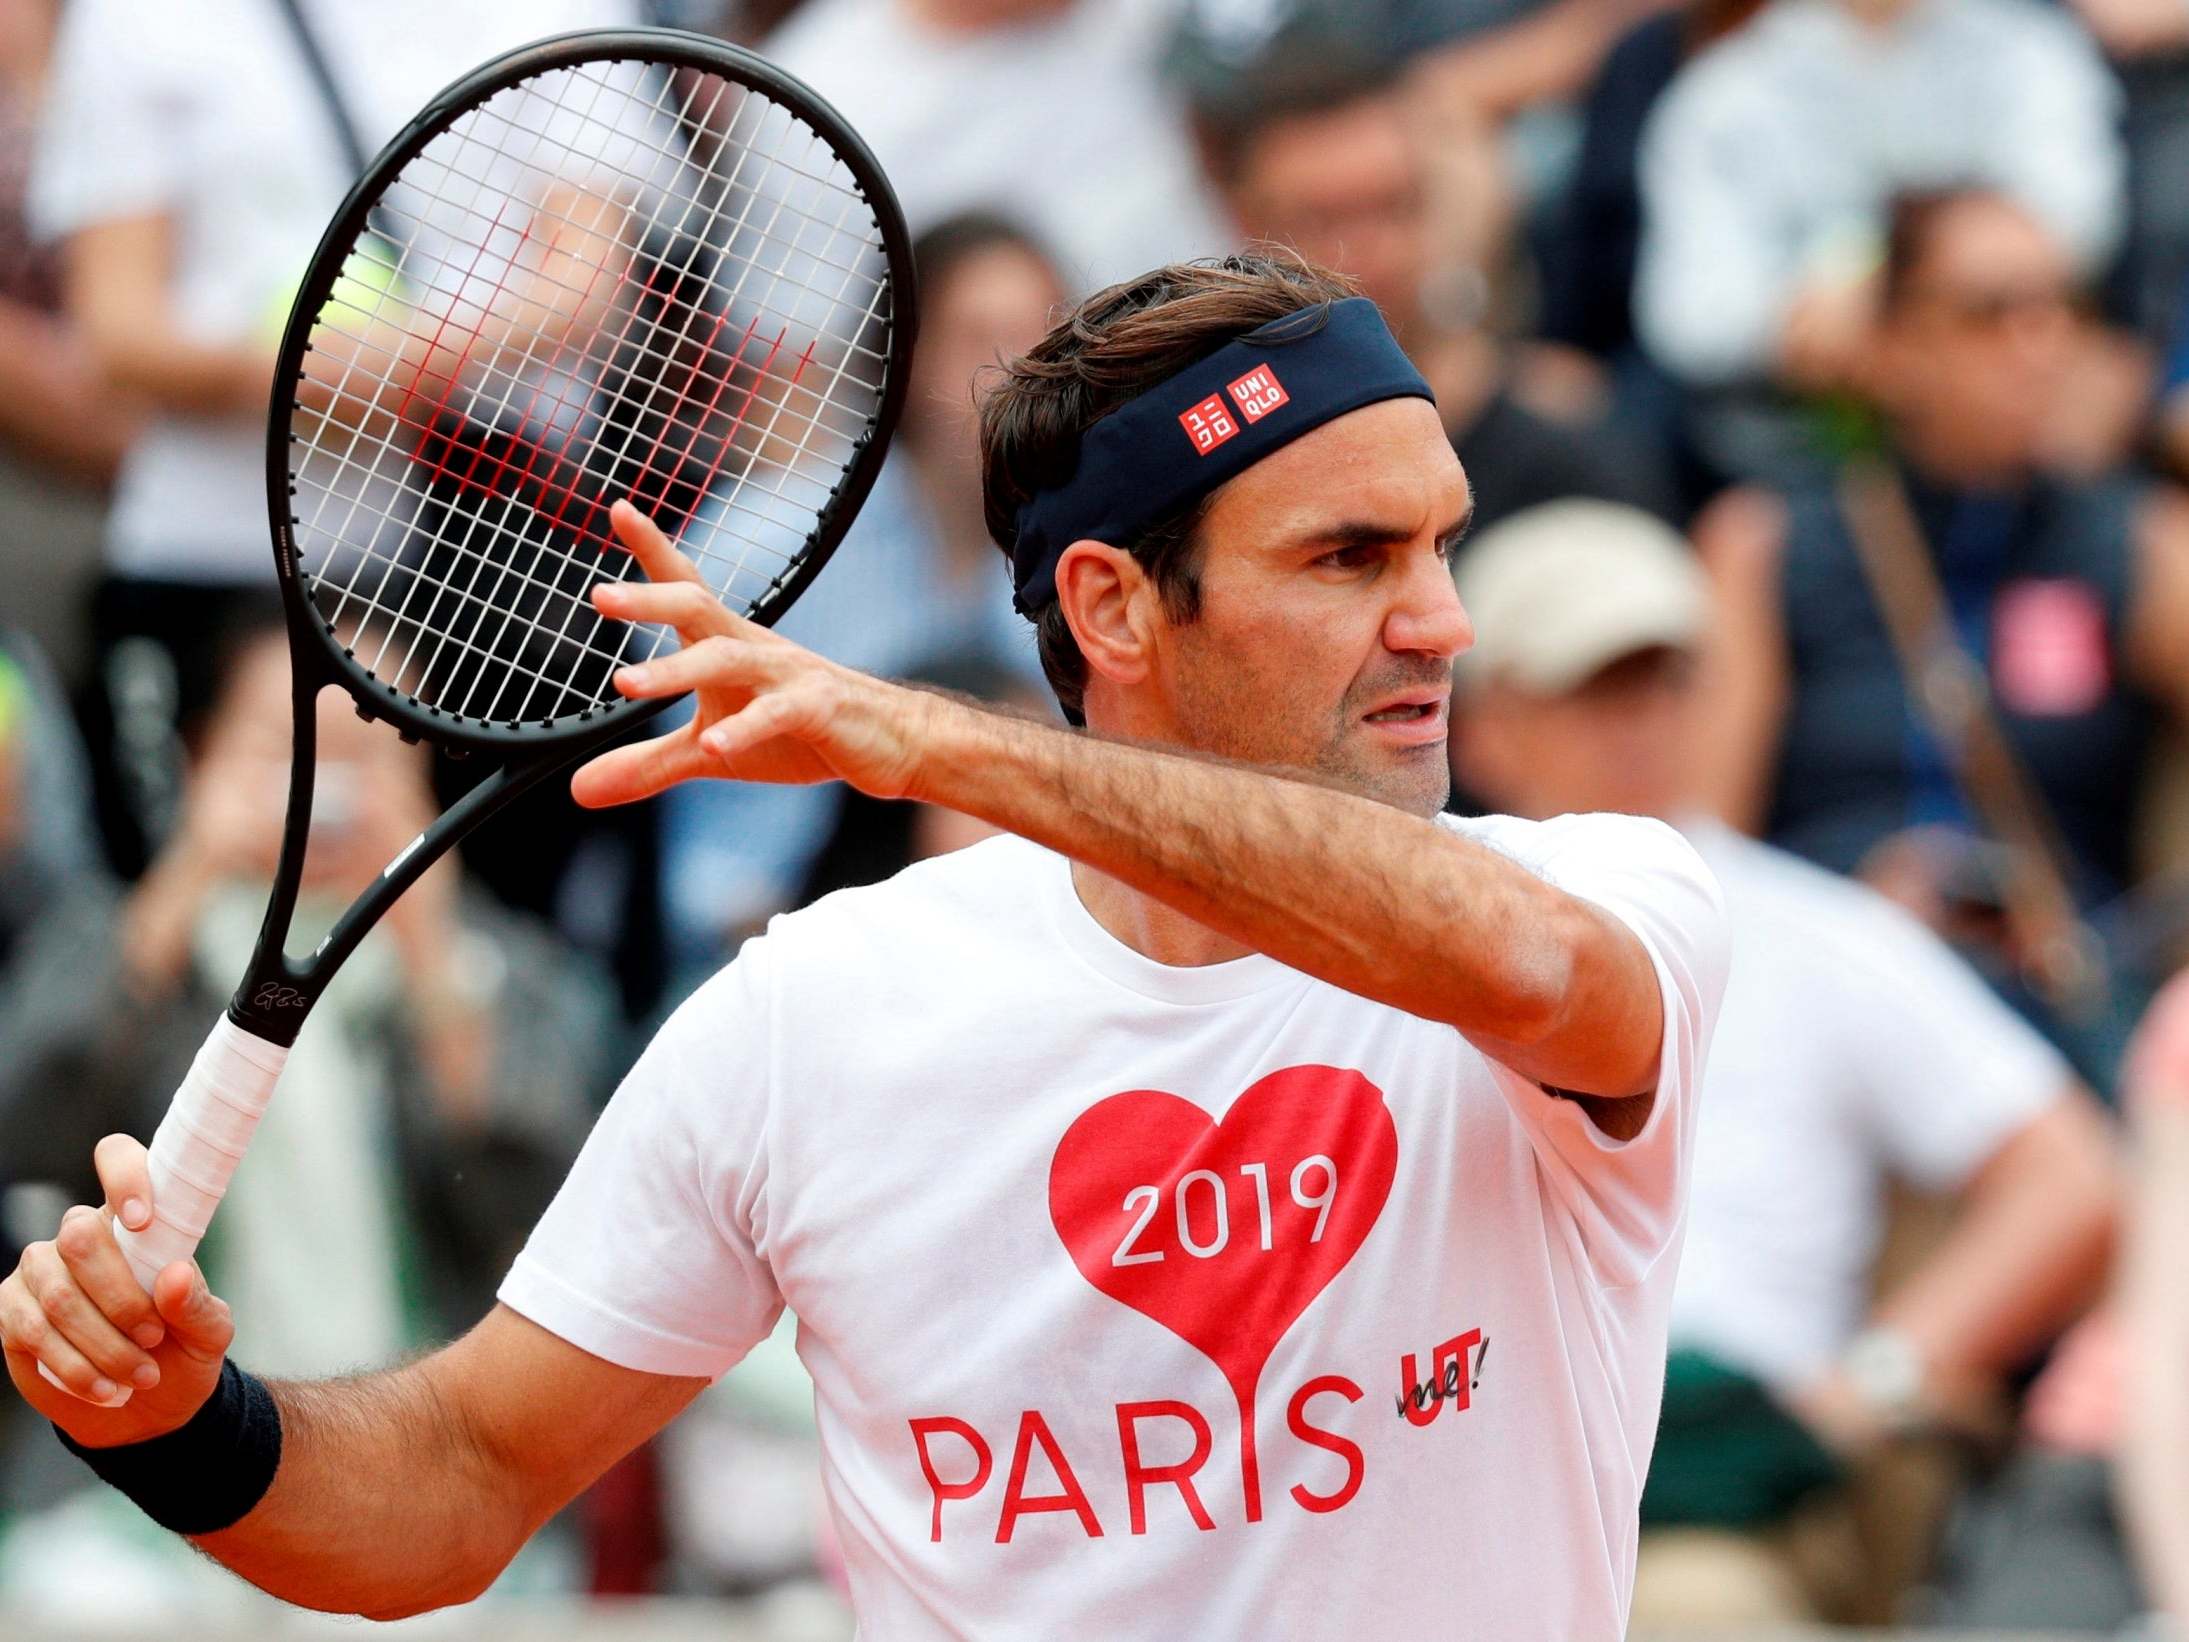 Roger Federer is in action on day one at the French Open